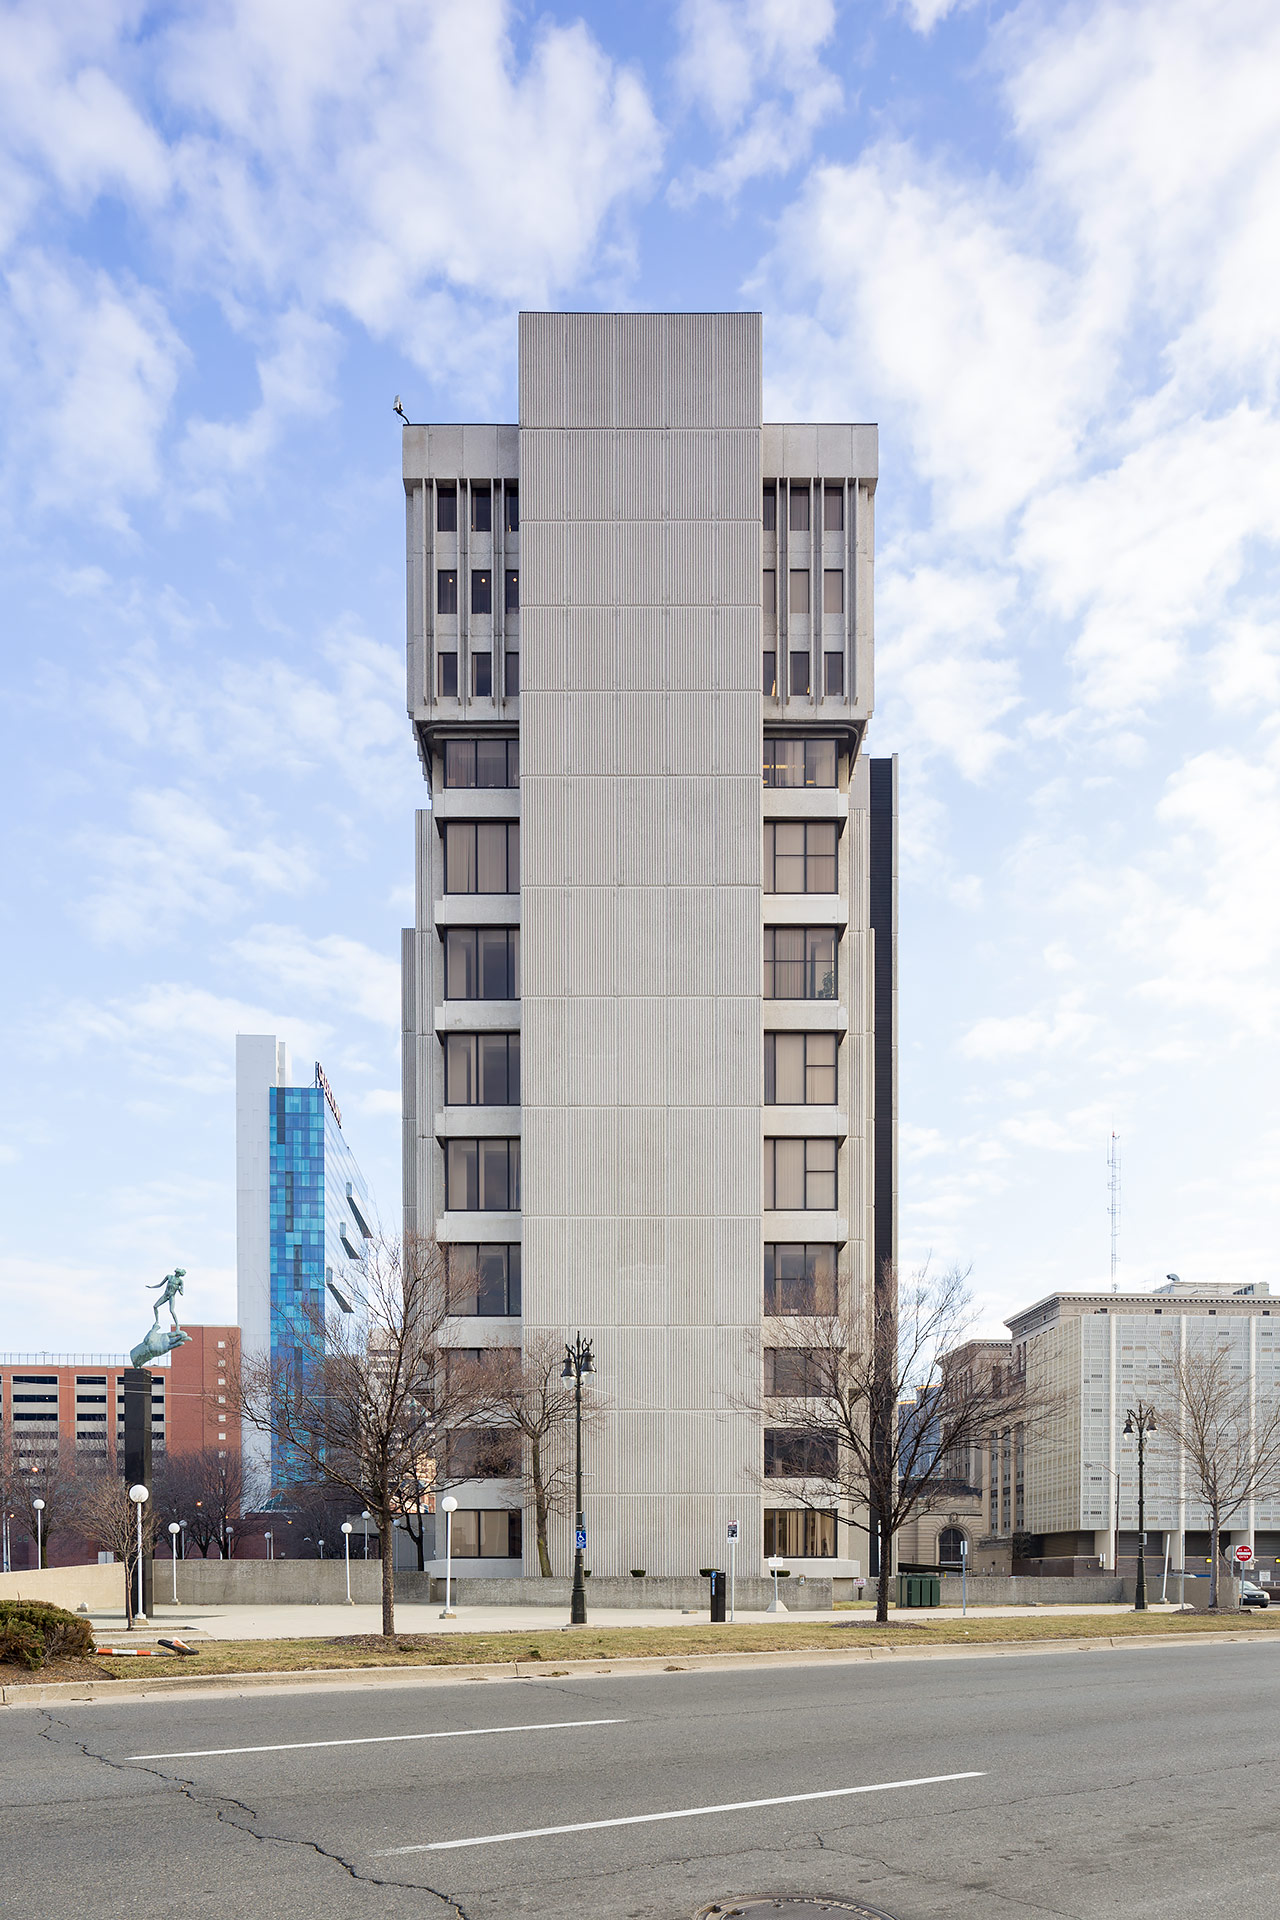 Frank Murphy Hall of Justice in Detroit by Eberle M. Smith. Photo by Jason R. Woods.